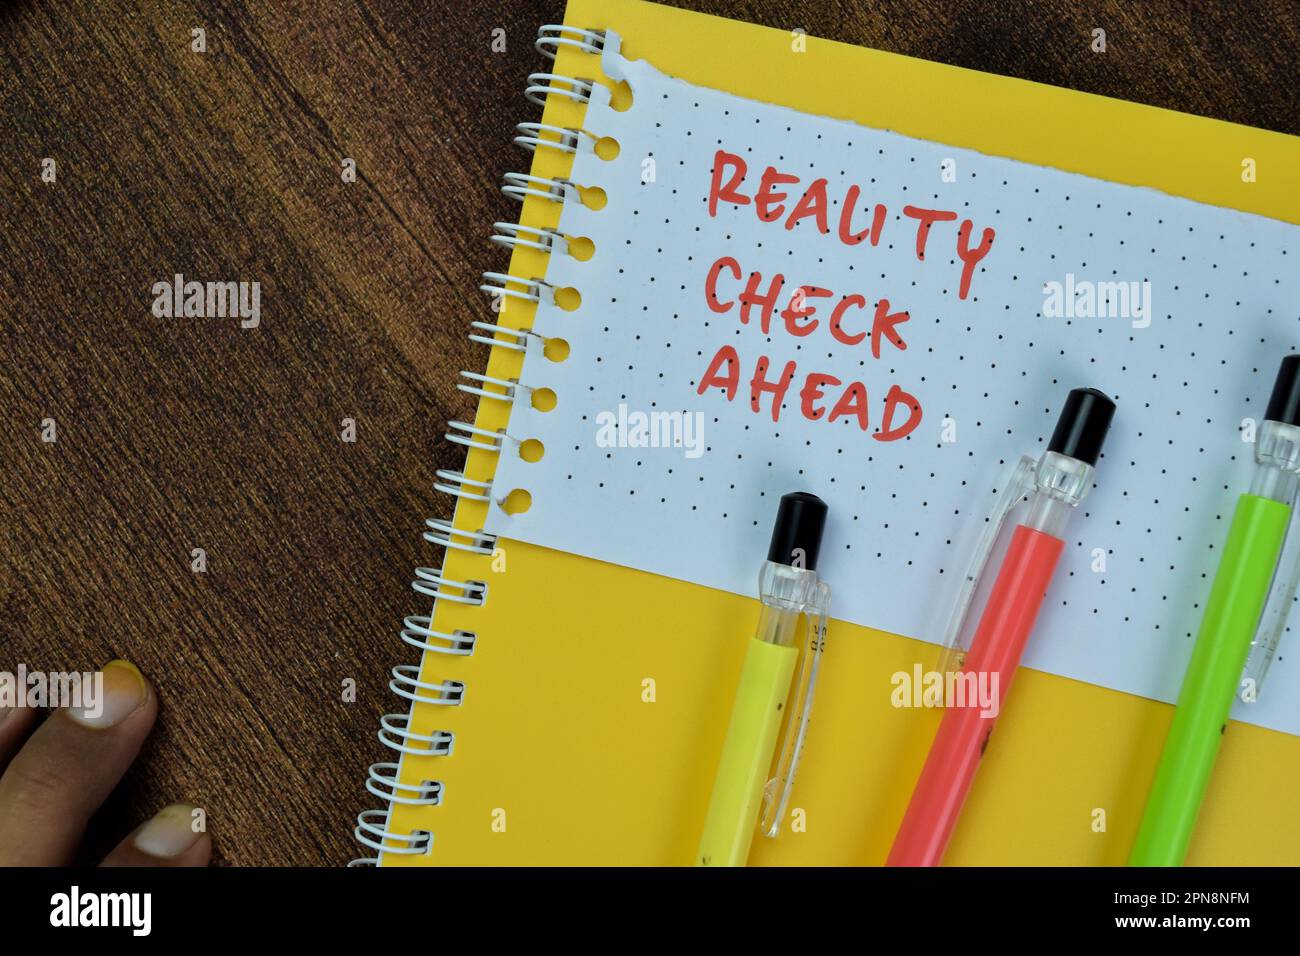 Concept of Reality Check Ahead write on sticky notes isolated on Wooden Table. Stock Photo